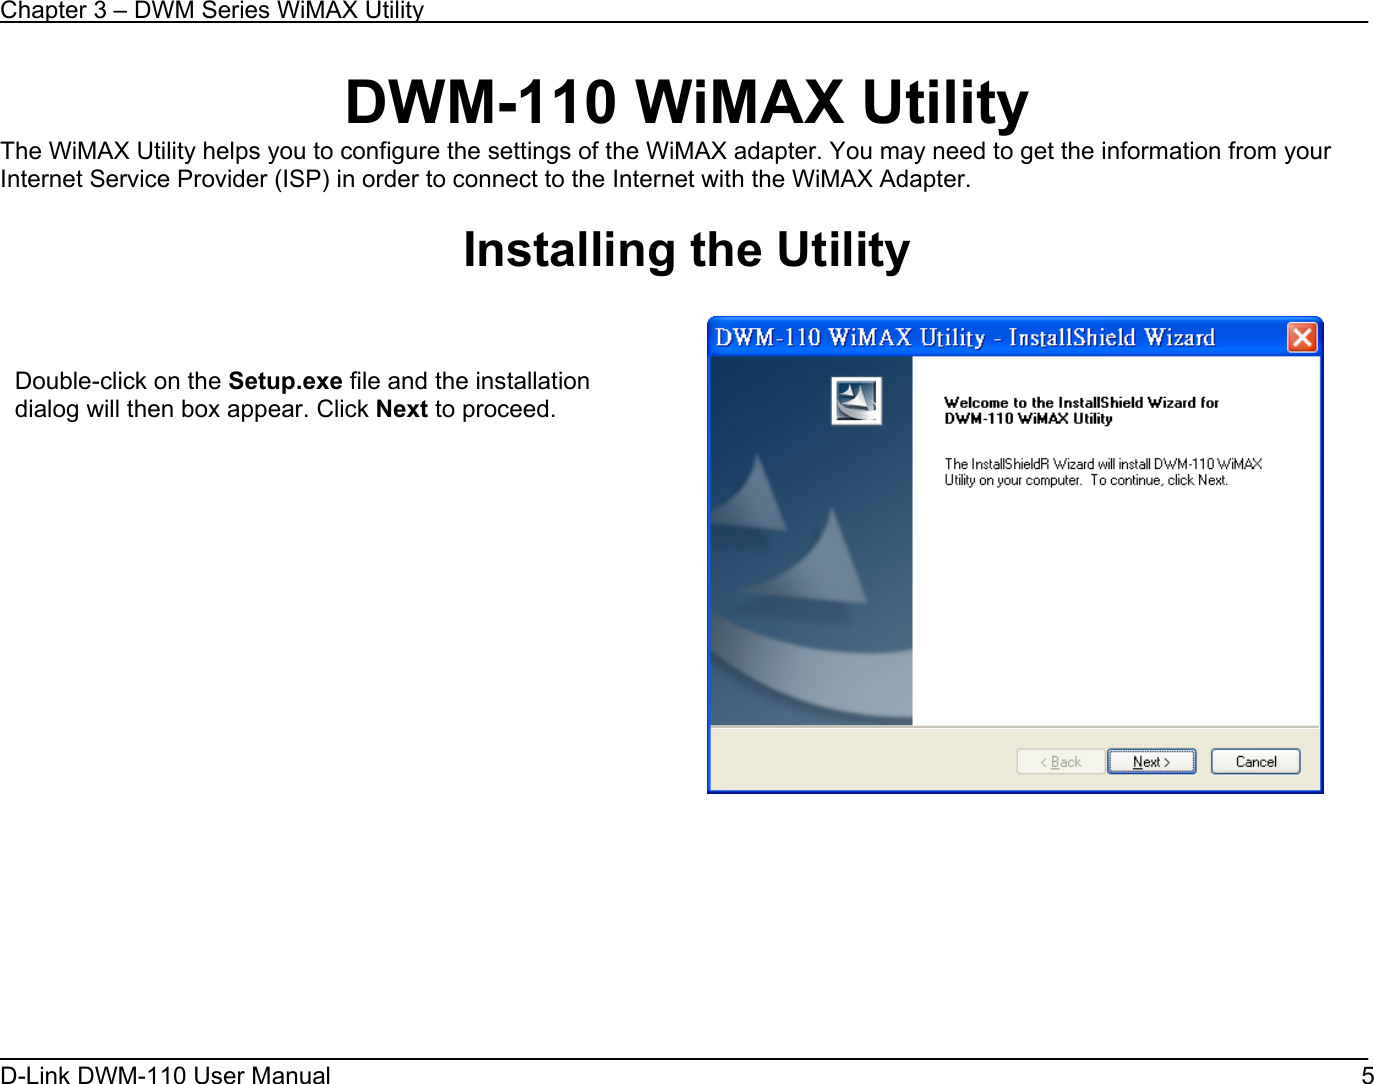 Chapter 3 – DWM Series WiMAX Utility D-Link DWM-110 User Manual   5 DWM-110 WiMAX Utility The WiMAX Utility helps you to configure the settings of the WiMAX adapter. You may need to get the information from your Internet Service Provider (ISP) in order to connect to the Internet with the WiMAX Adapter.  Installing the Utility          Double-click on the Setup.exe file and the installation dialog will then box appear. Click Next to proceed.   